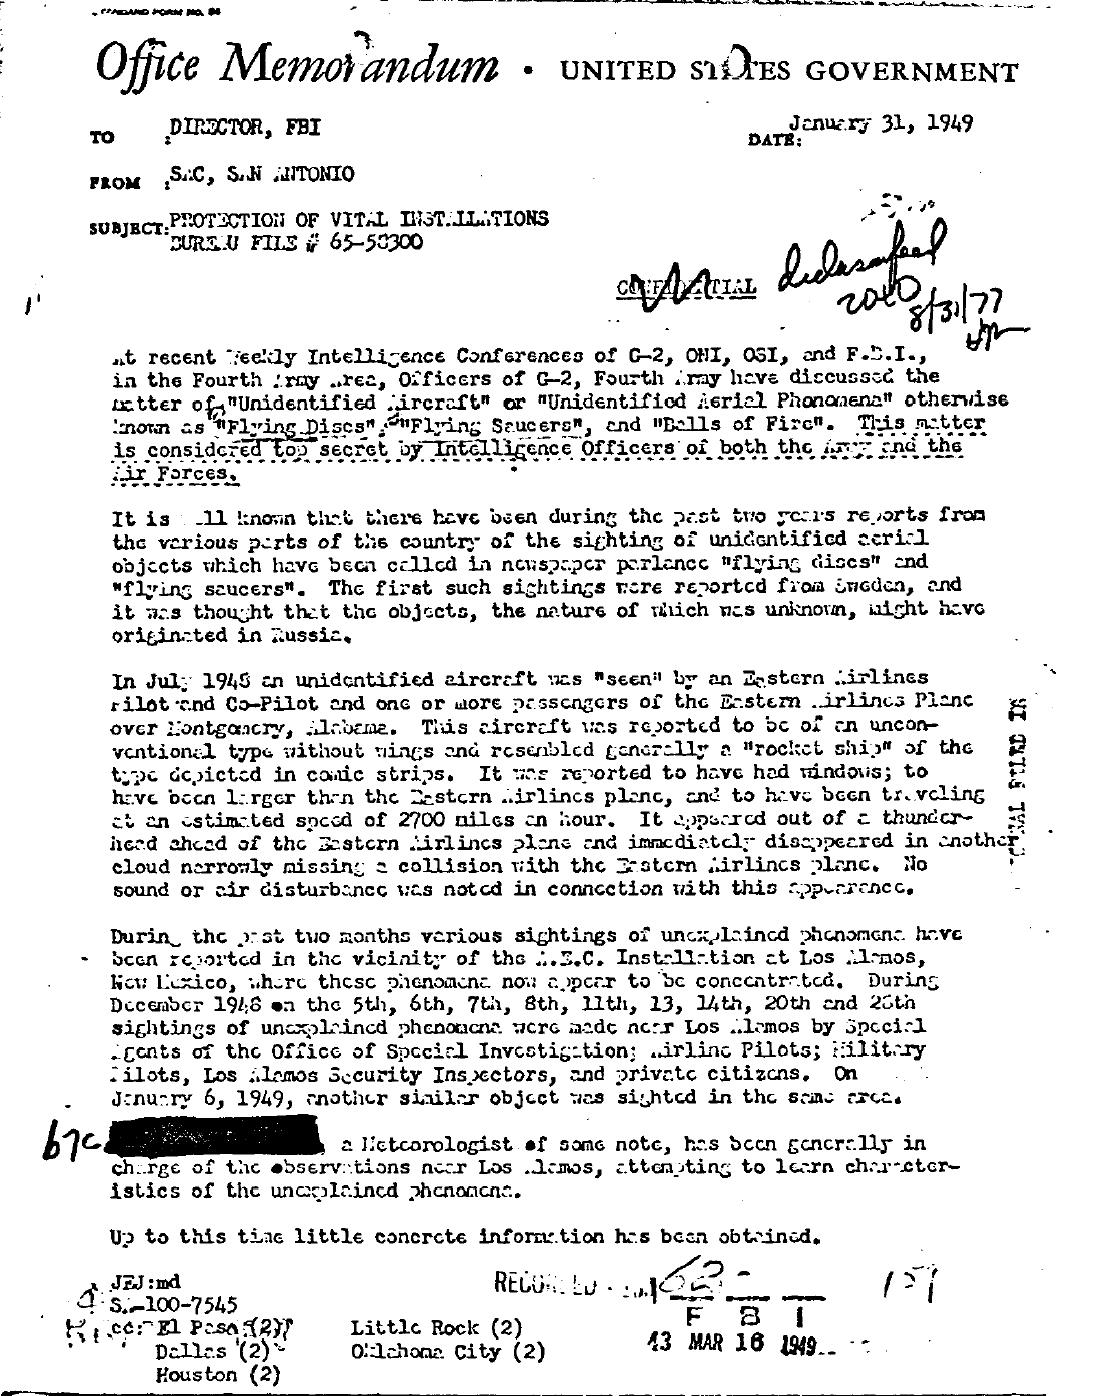 1000+ images about Ufo documents on Pinterest | Majestic ...